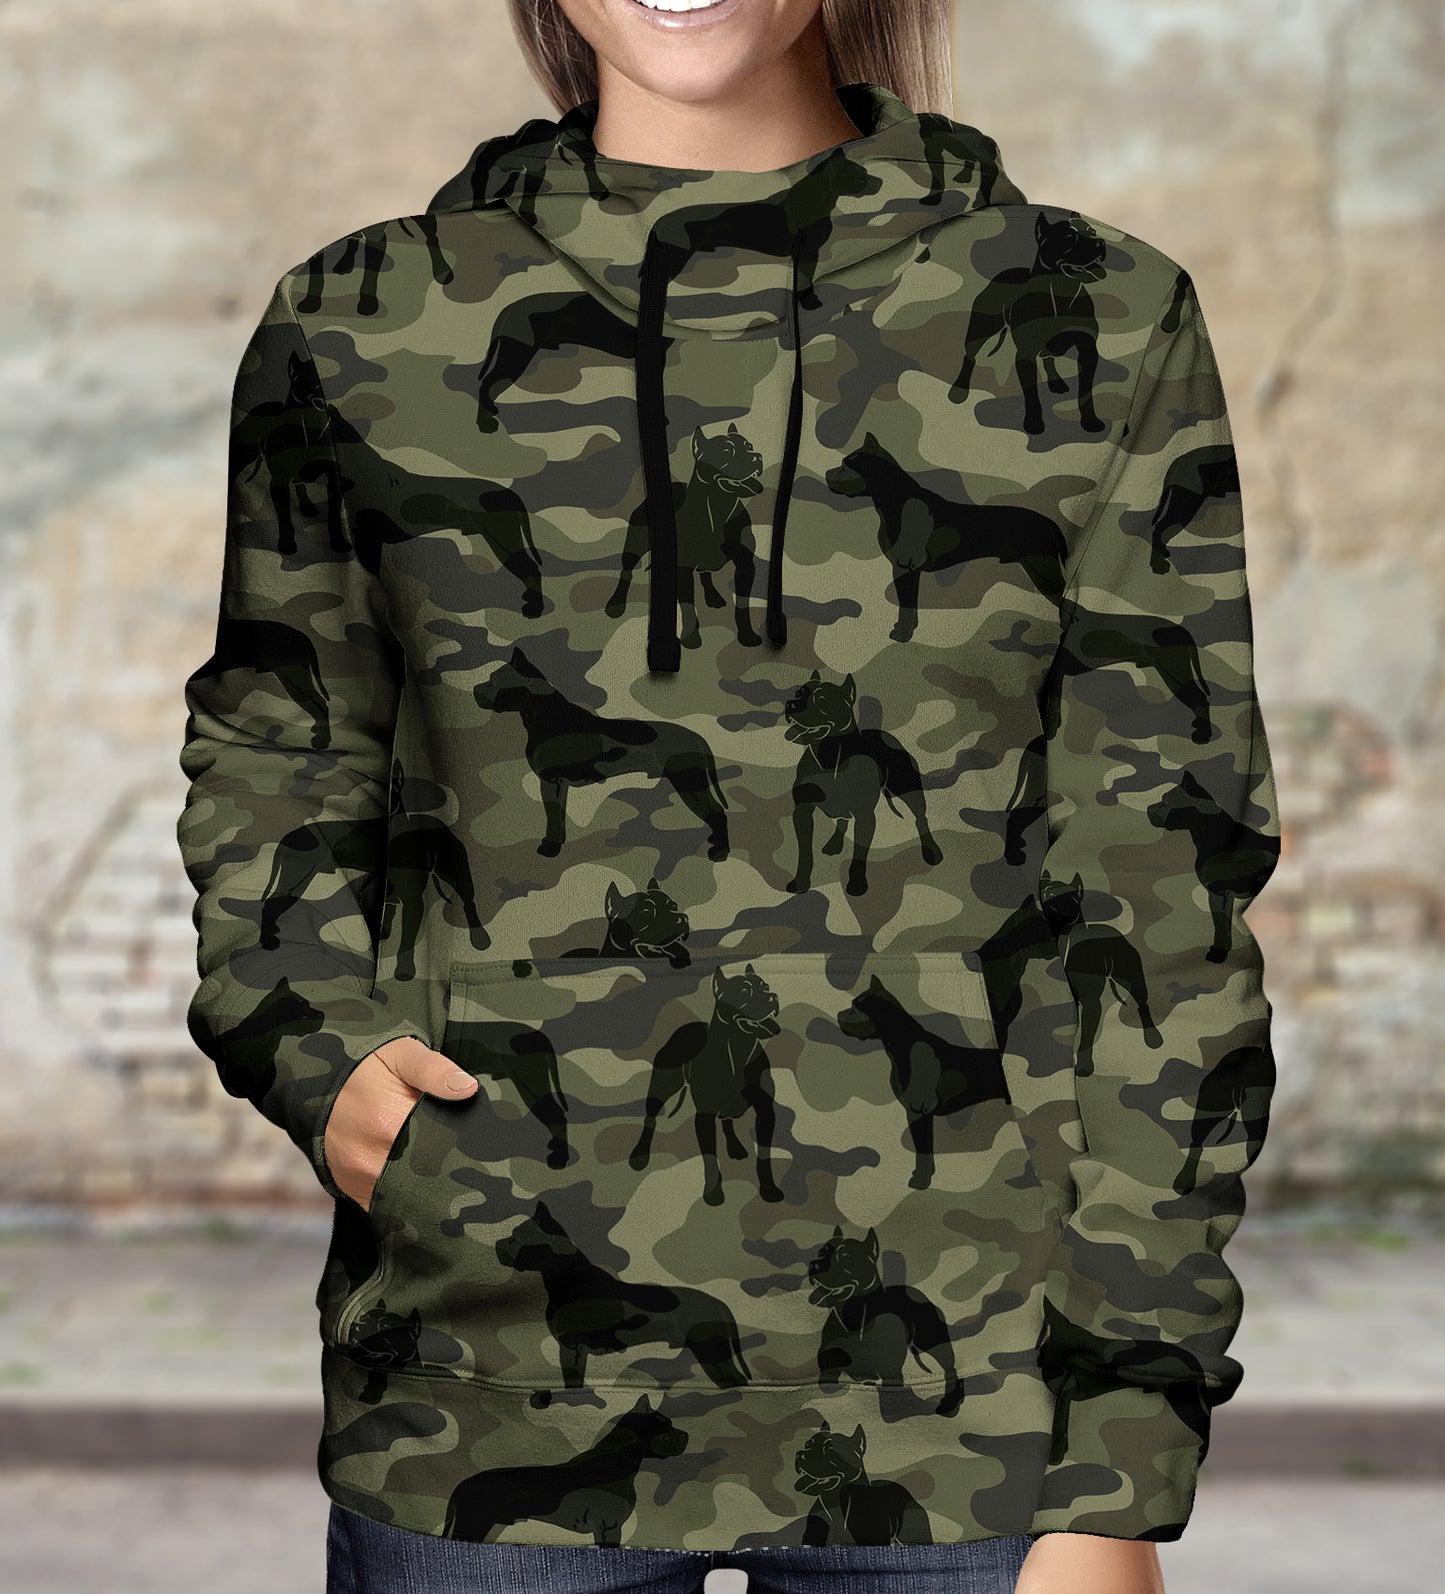 Street Style With American Pit Bull Terrier Camo Hoodie V1